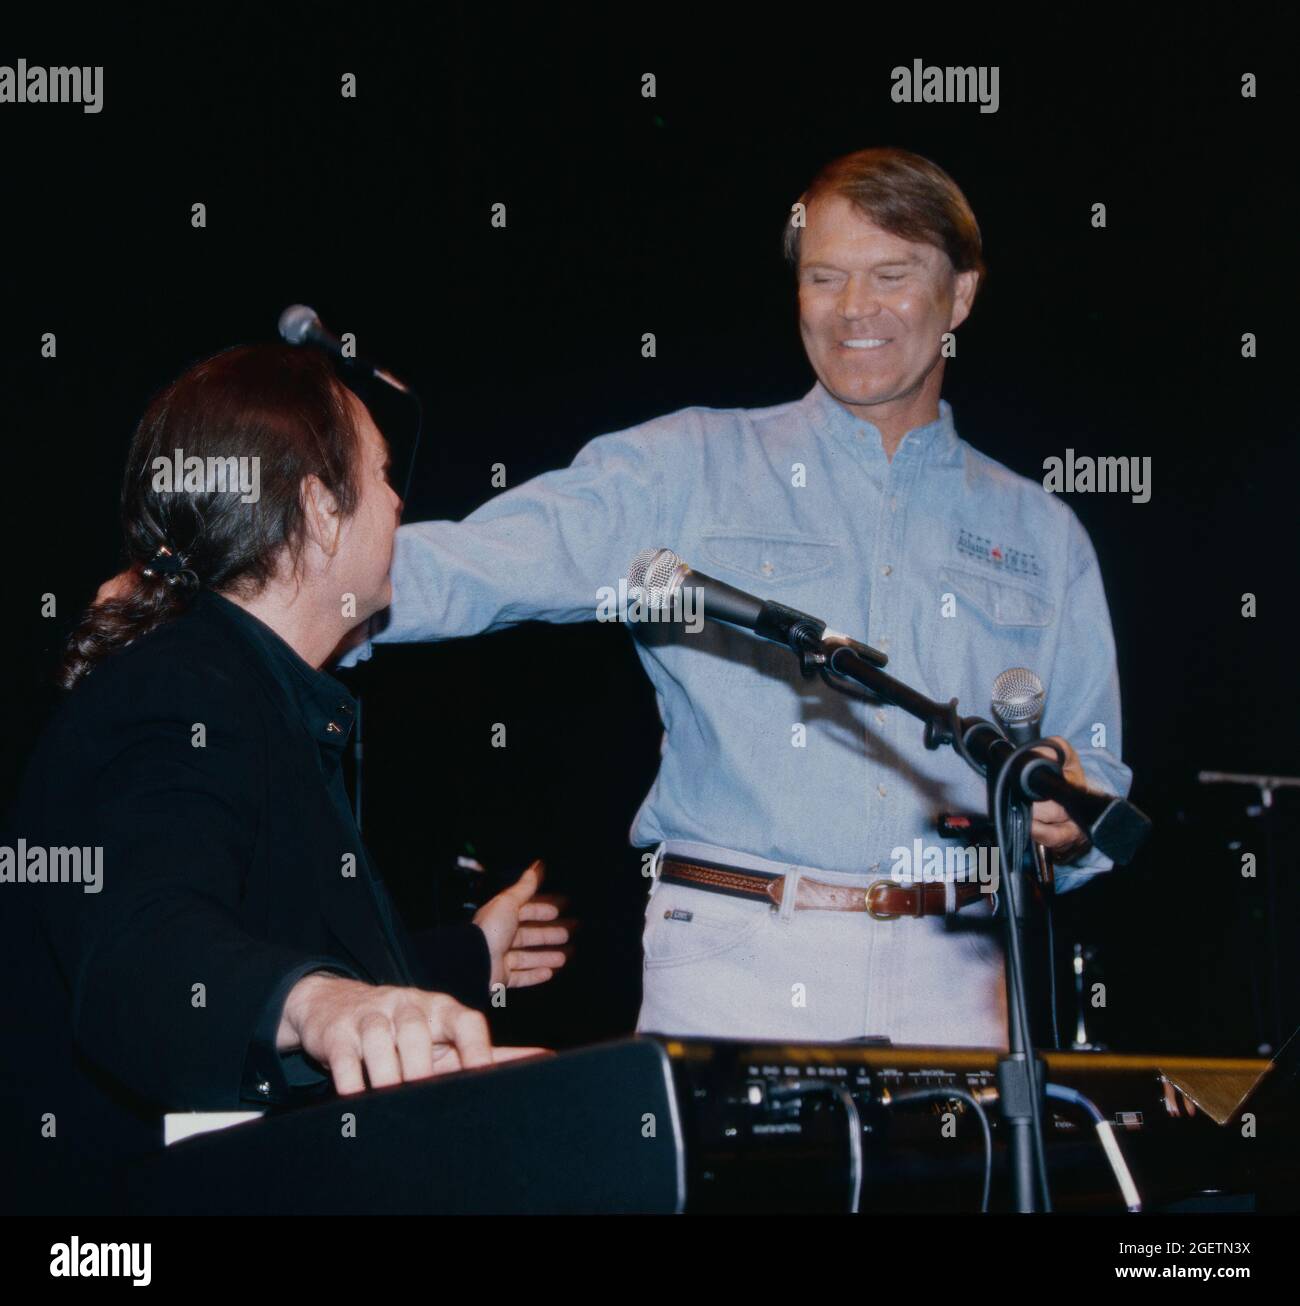 Glen Campbell and song writer, Jimmy Webb give an impromptu performance at Campbell's surprise 60th birthday celebration in Branson, Missouri on April 20, 1996, two days before his actual birthday. Jimmy Webb wrote and collaborated with Campbell on many of his hits including, “By the Time I Get to Phoenix”, “Wichita Lineman” and “Galveston”. Stock Photo